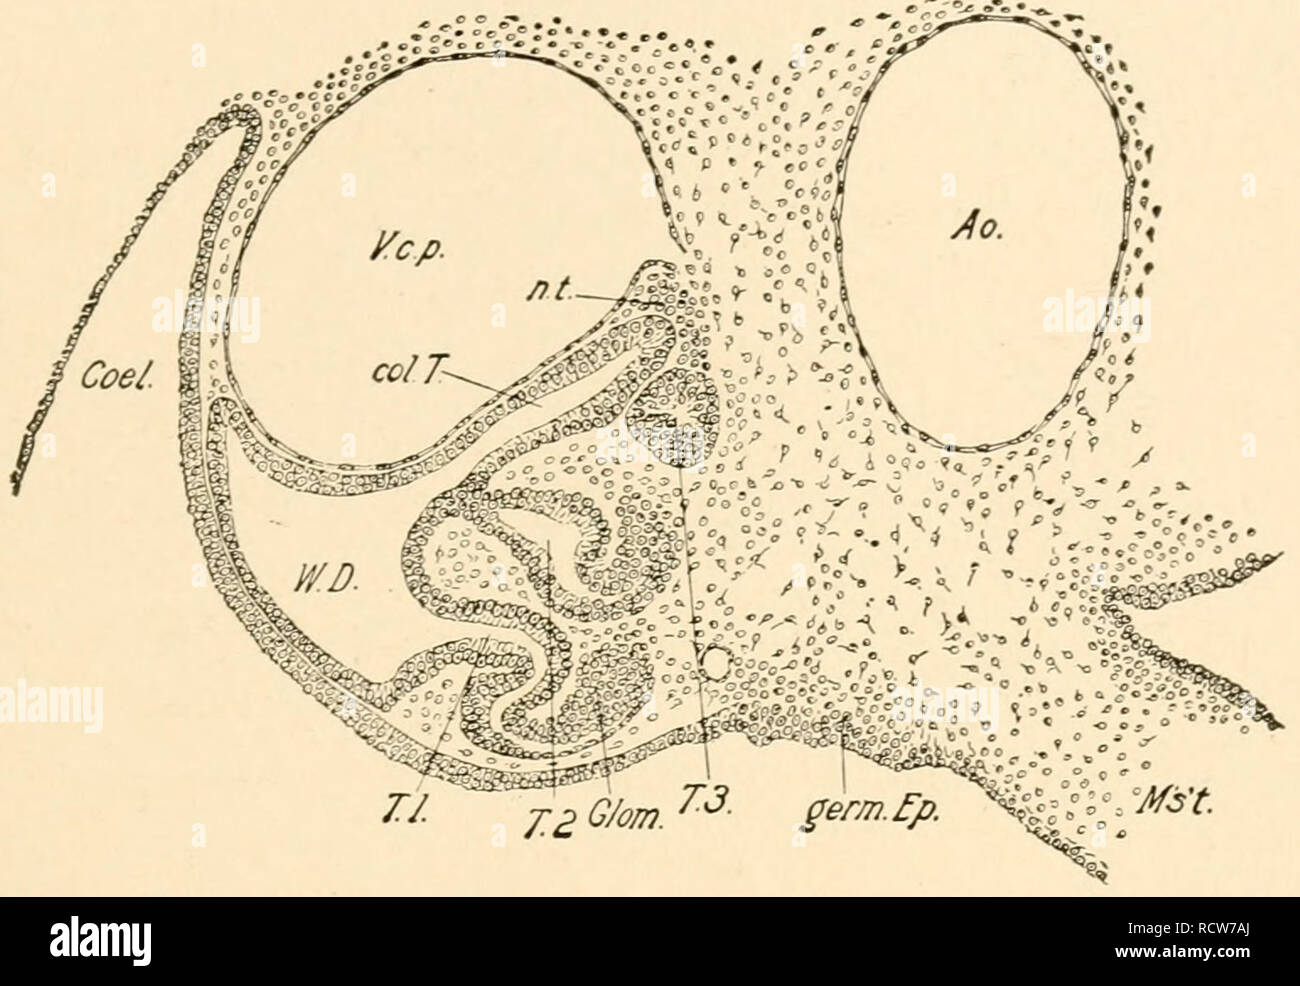 . The development of the chick; an introduction to embryology. Birds -- Embryology. THE URIXOGEXITAL SYSTEM 379 taneously: primary tubules are formed in each somite from the most ventral portion of the nephrogenous tissue; then secondary tubules later from an intermediate portion, and tertiary tubules later yet from the dorsal portion. Fig. 217 represents a transverse section through the middle. Fig. 217. — Transverse section through the middle of the Wolffian body of a chick embryo of 96 hours. Ao., Aorta. Coel., Coelome. Col. T., Collecting tubule. Glom., Glomerulus, germ. Ep., Germinal epit Stock Photo